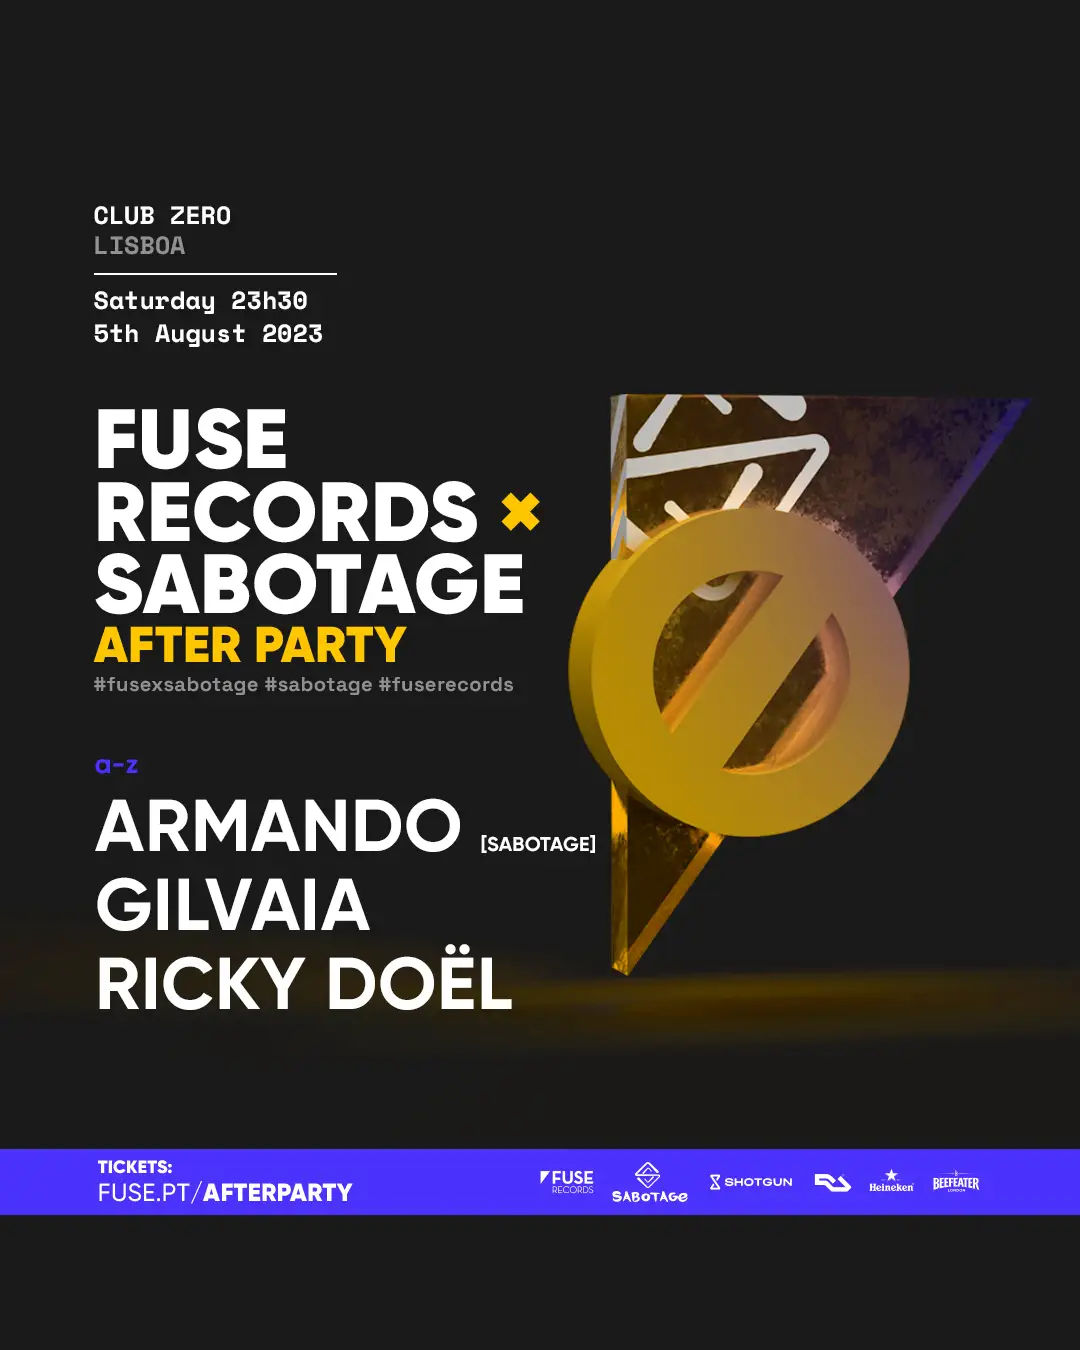 Fuse Records x Sabotage After Party